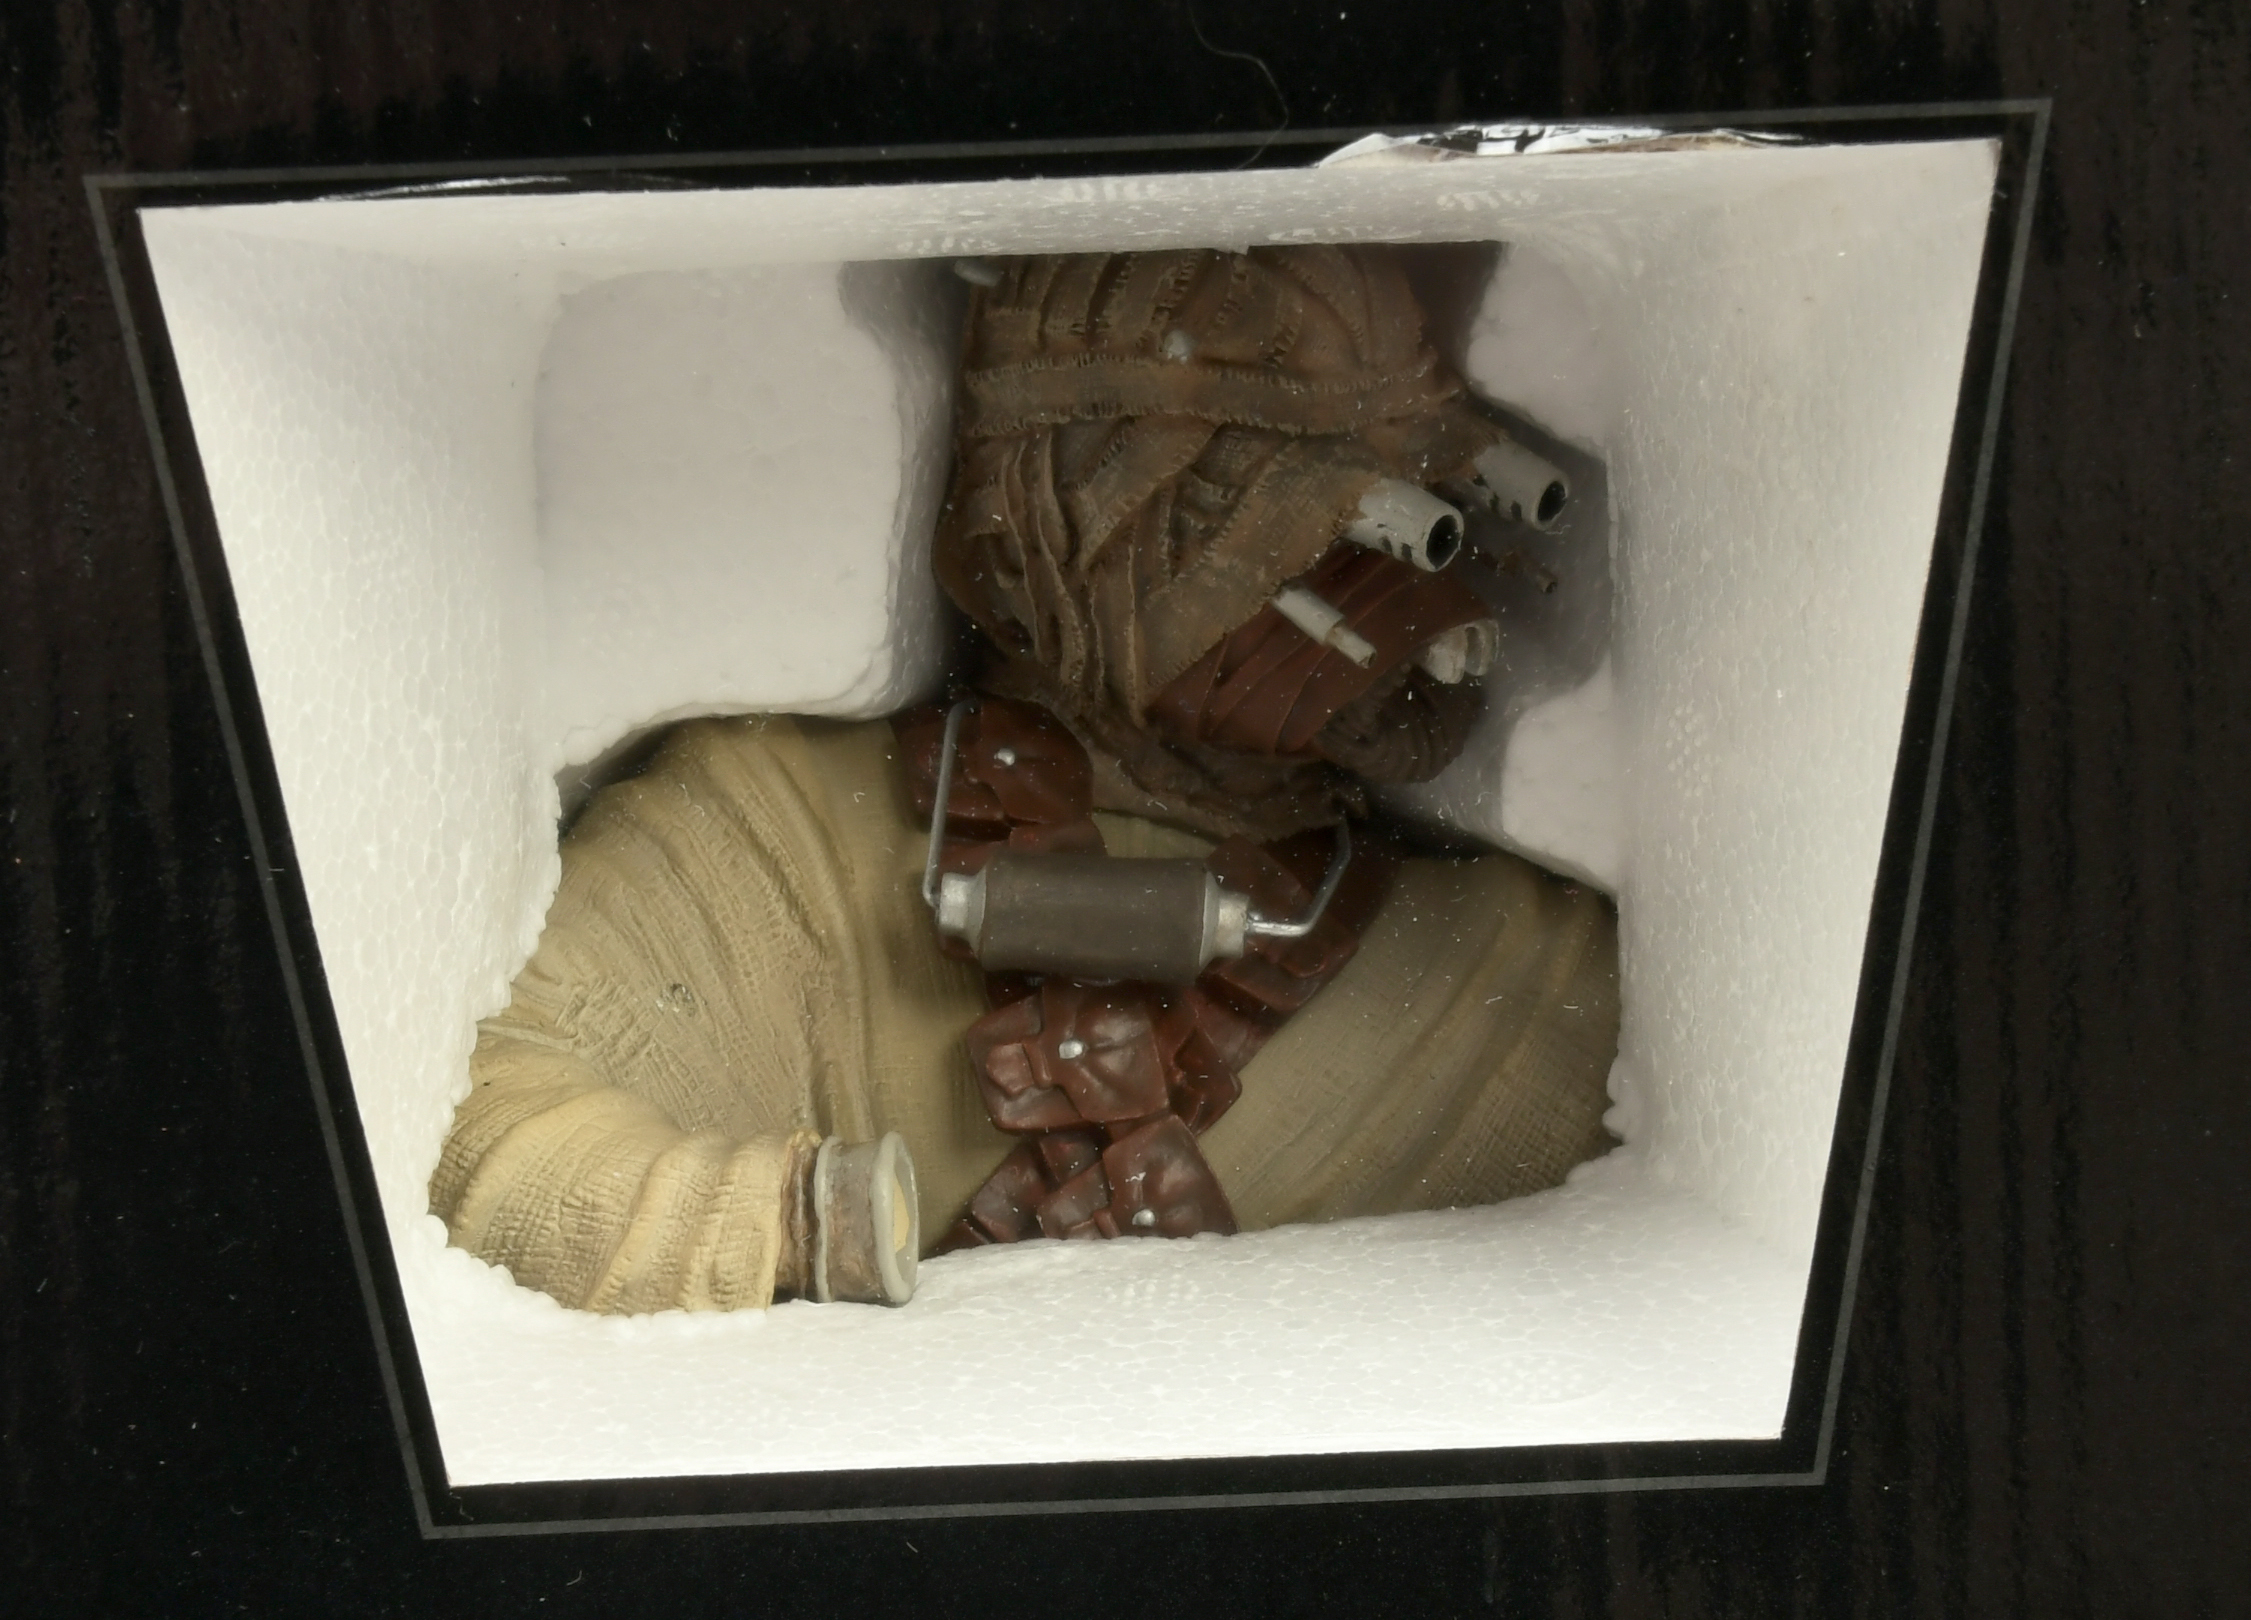 Gentle Giant Star Wars Tusken Raider deluxe collectible bust - Image 2 of 2